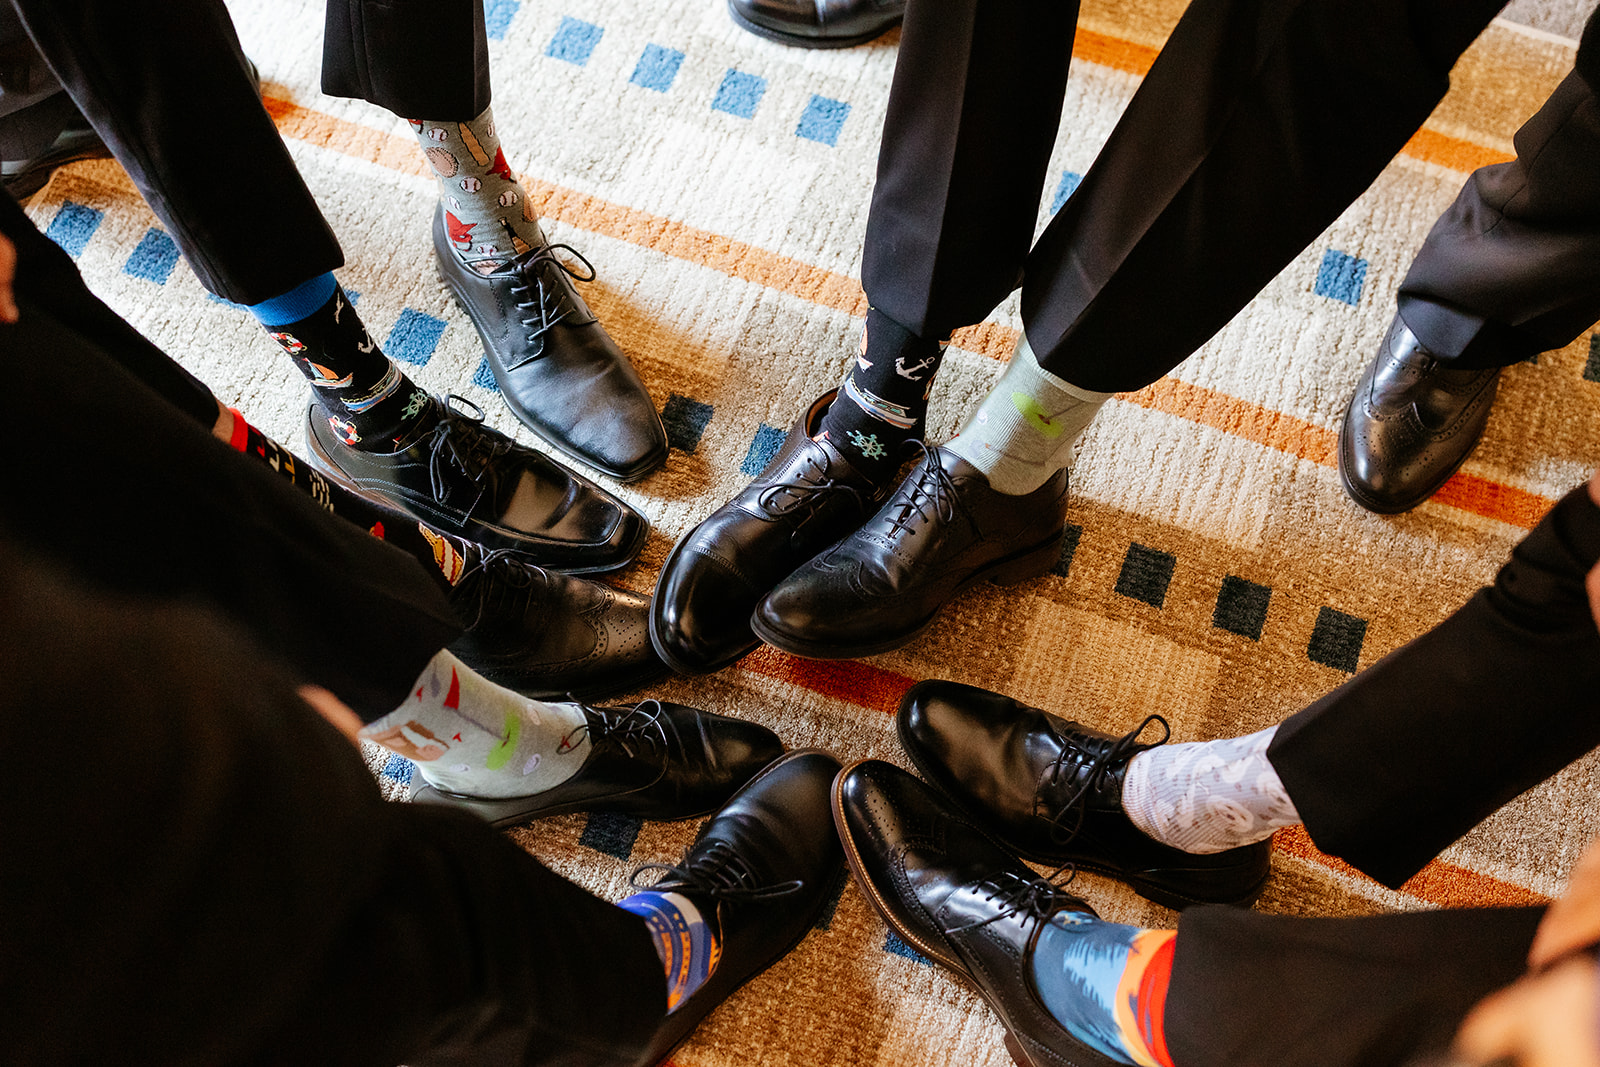 A group of individuals wearing formal black shoes and a variety of colorful, patterned socks stand closely together, showcasing a contrast between traditional formal attire and playful sock choices.